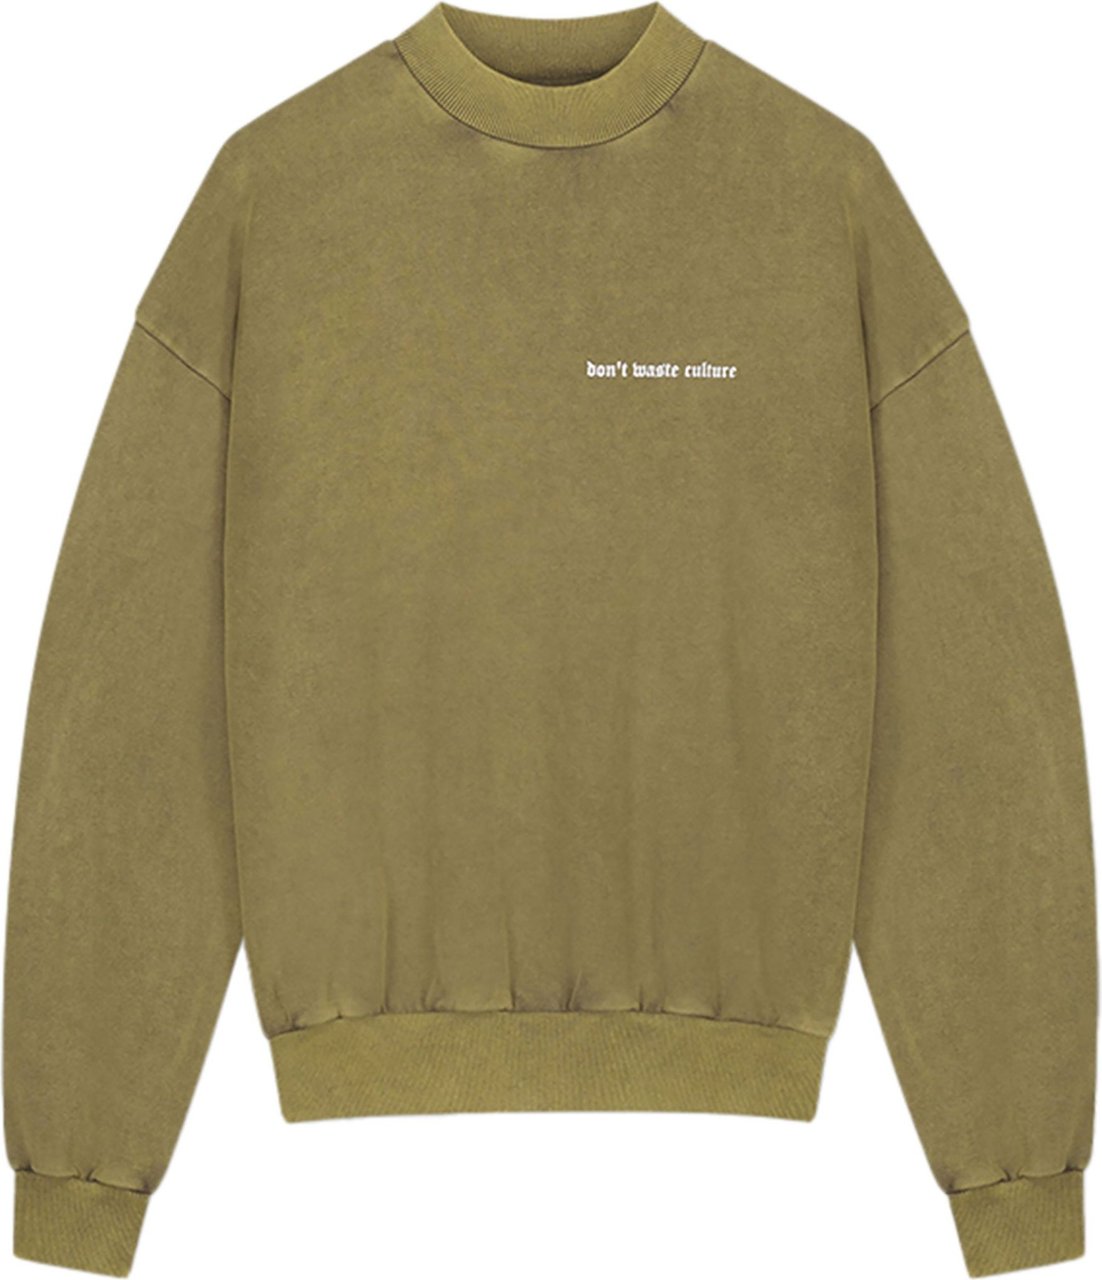 Don't Waste Culture Crewneck Andrew Groen